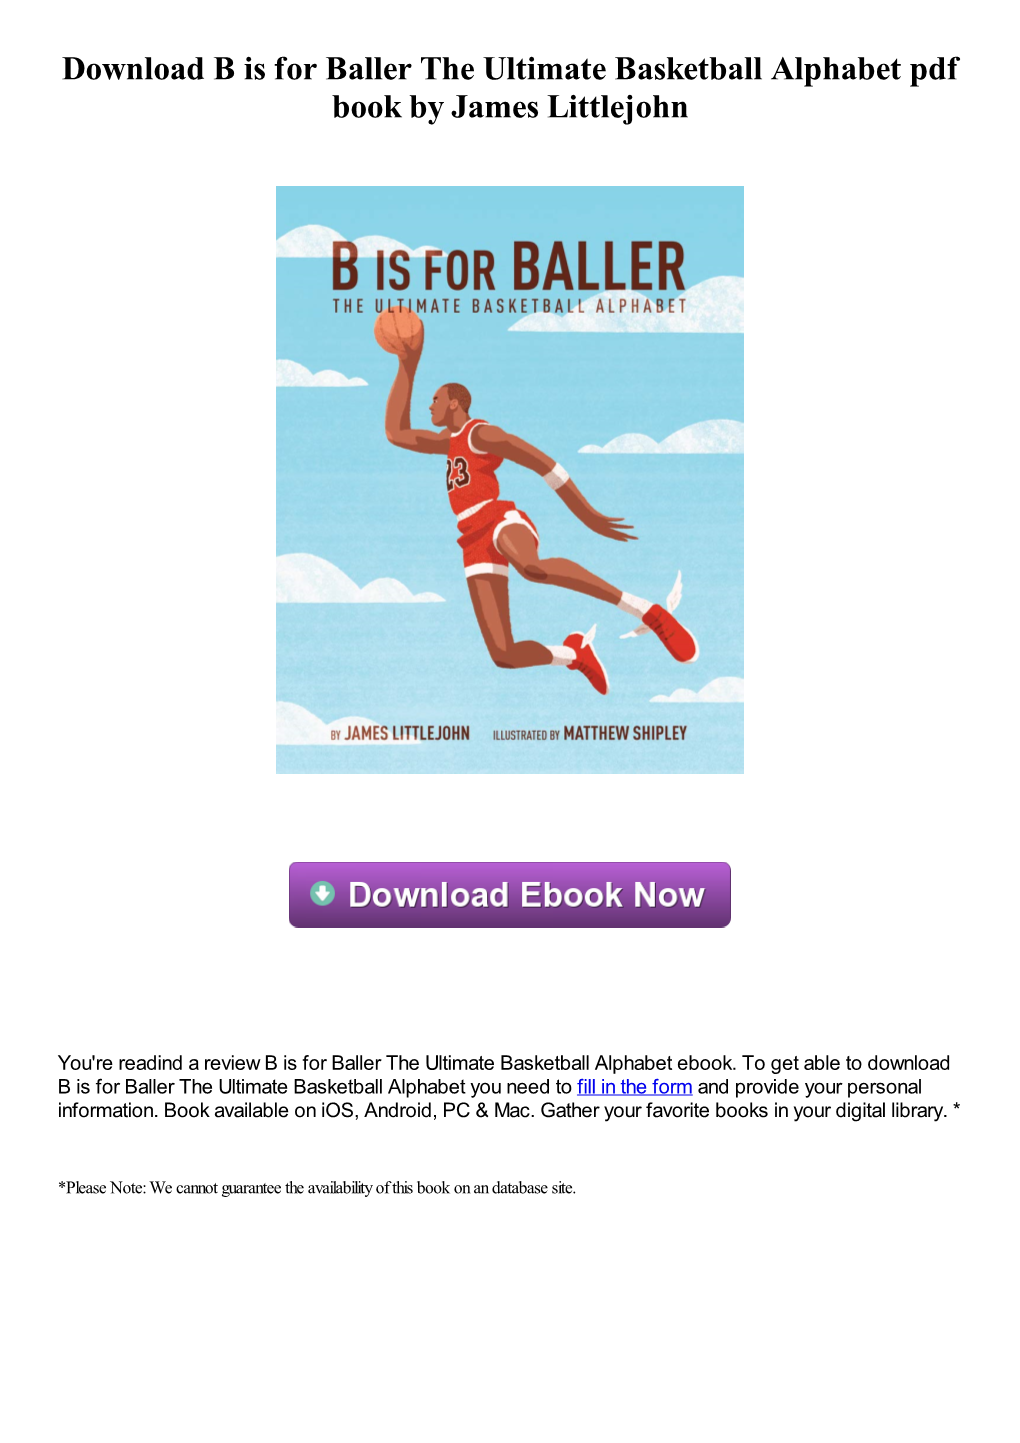 Download B Is for Baller the Ultimate Basketball Alphabet Pdf Book by James Littlejohn